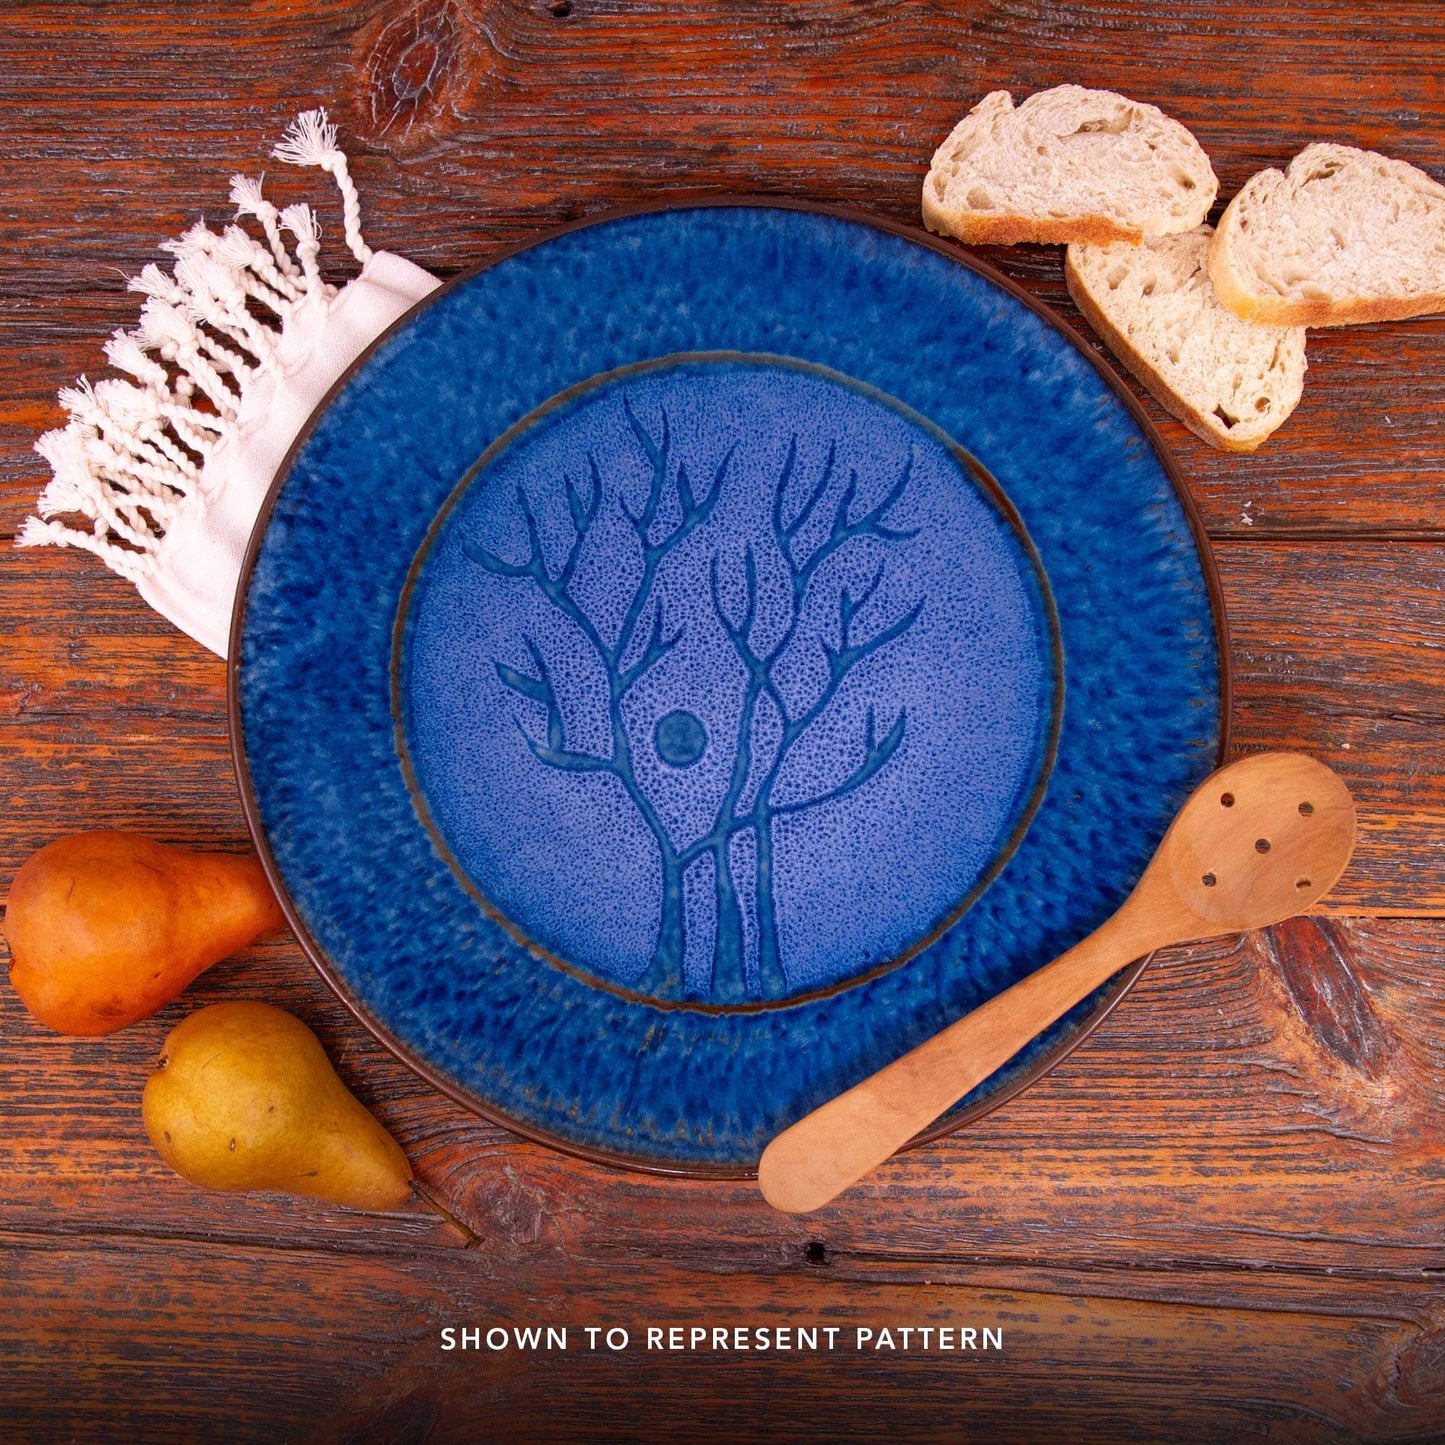 Handmade Pottery Trivet in Blue Tree pattern made by Georgetown Pottery in Maine